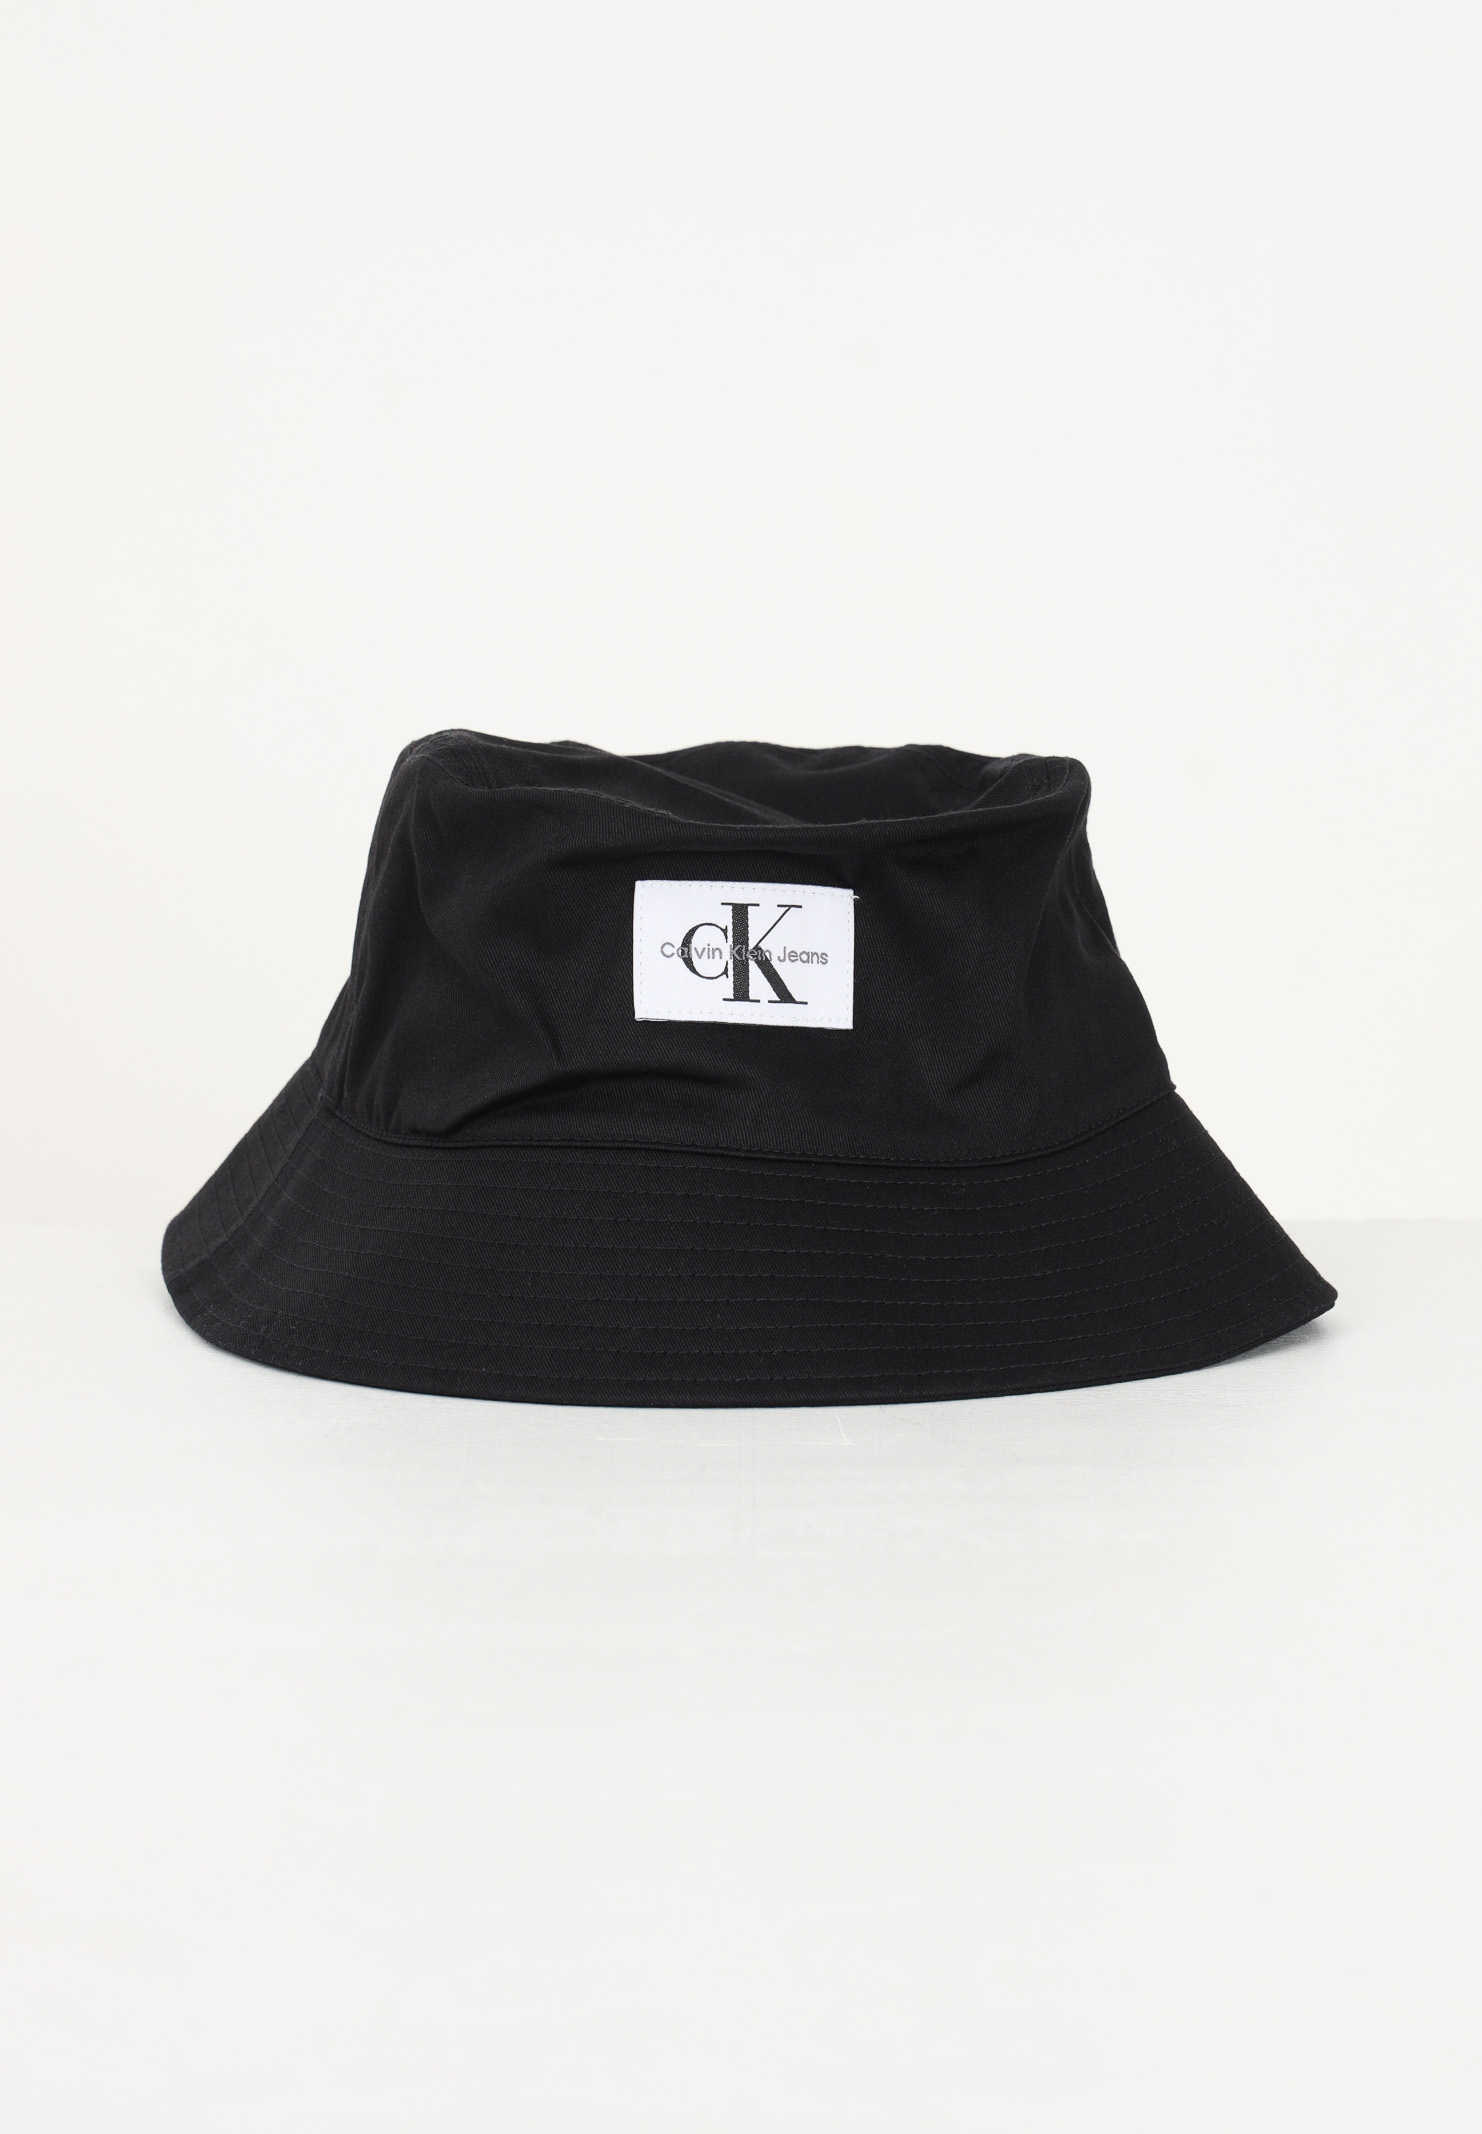 Black bucket for men and women with logo patch - CALVIN KLEIN JEANS -  Pavidas